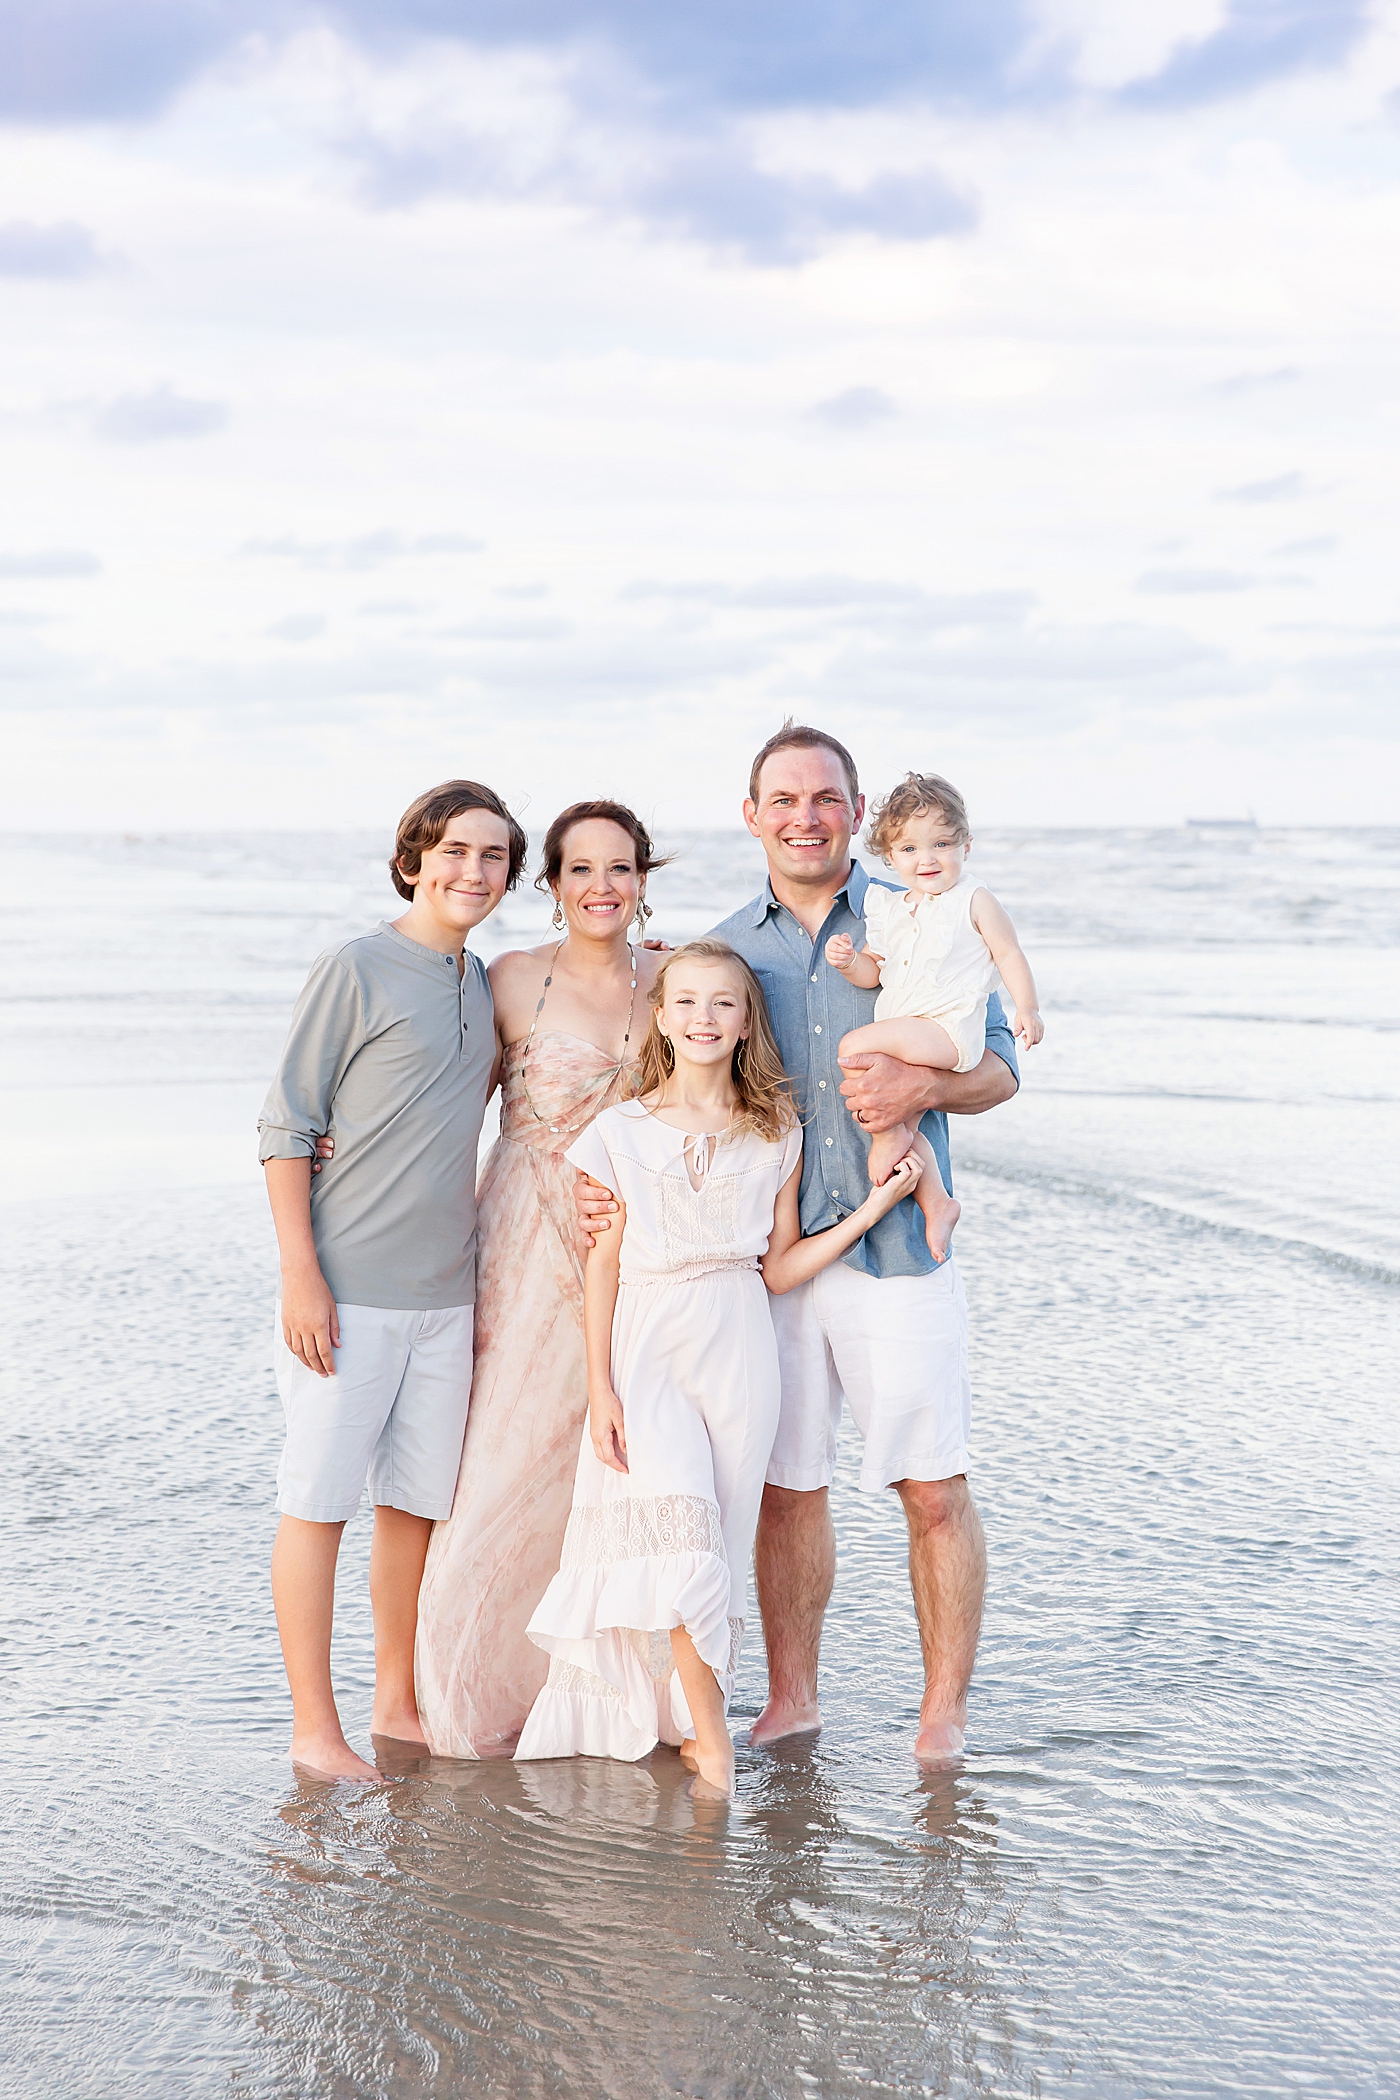 Family portrait along the water on Galveston Beach. Photo by Fresh Light Photography.